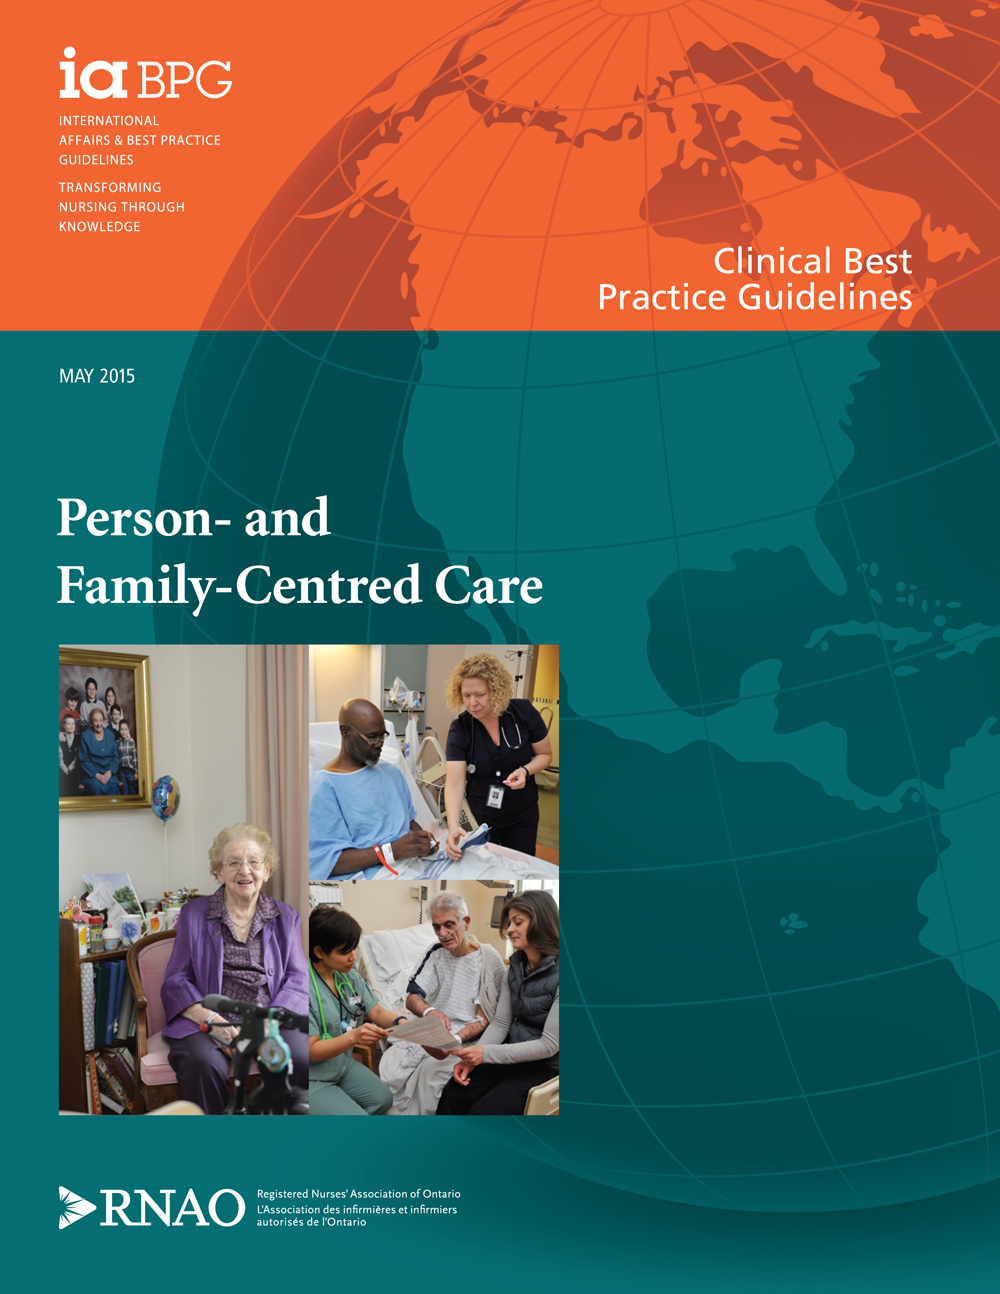 Person- and Family-Centred Best Practice Guideline